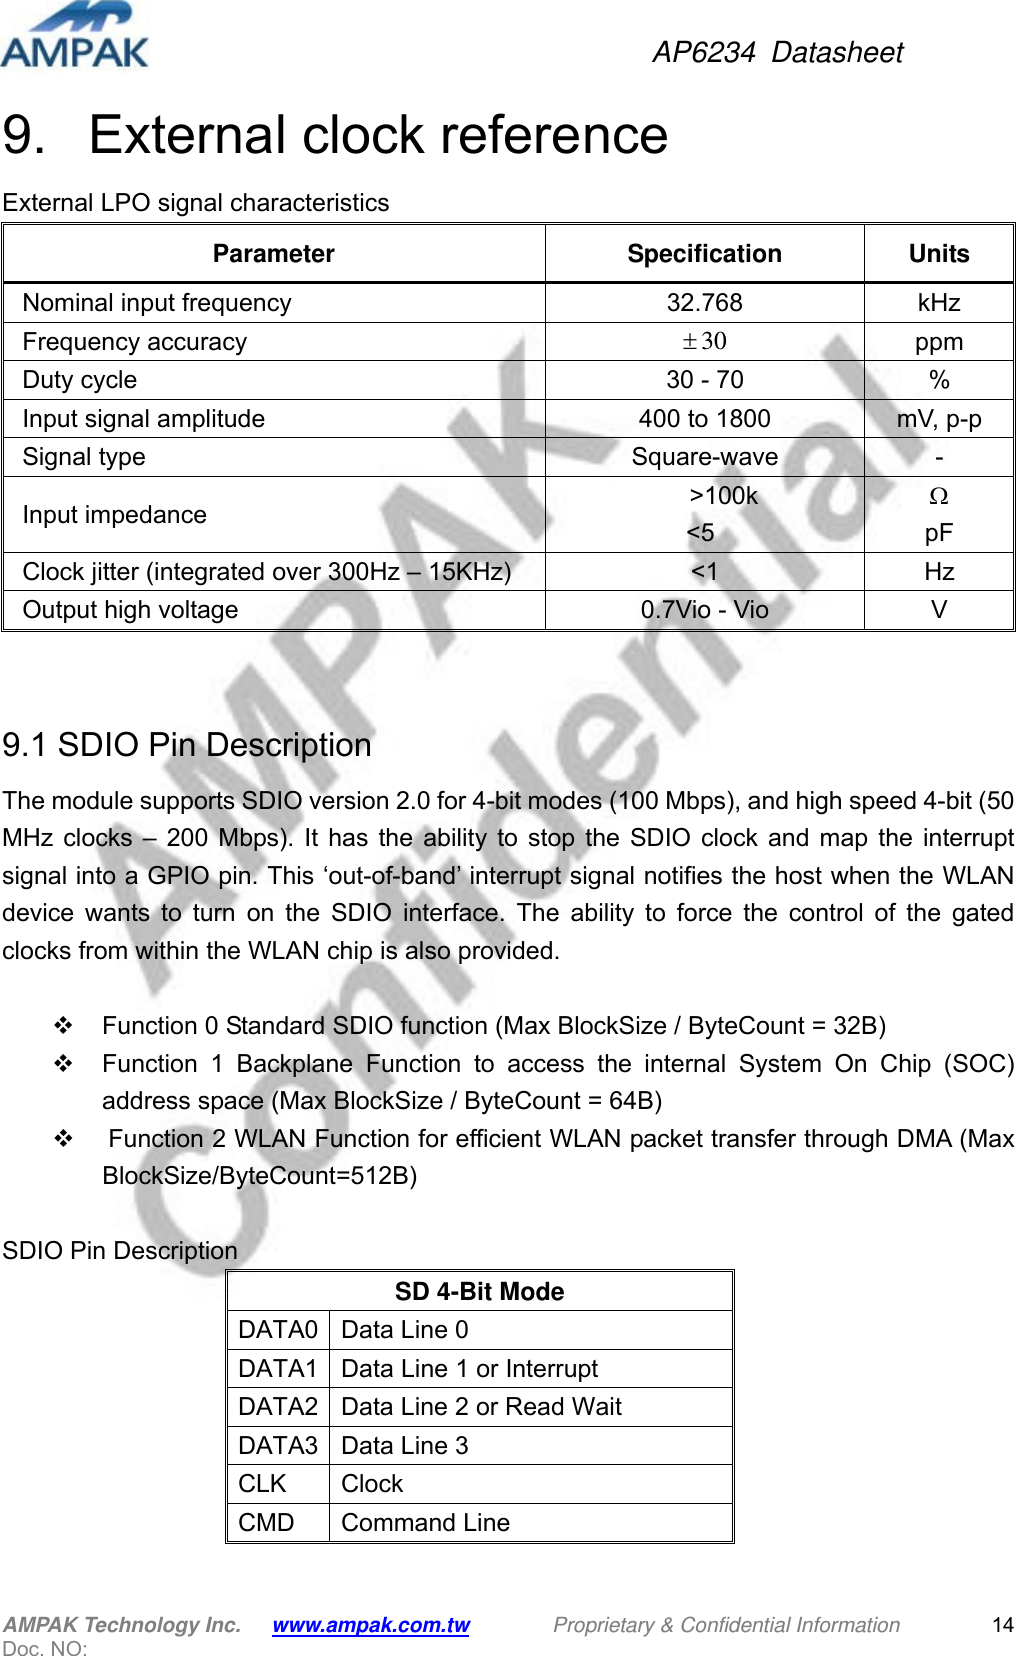 AP6234 Datasheet AMPAK Technology Inc.      www.ampak.com.tw        Proprietary &amp; Confidential Information       Doc. NO:   149.   External clock reference External LPO signal characteristics Parameter Specification Units Nominal input frequency  32.768  kHz Frequency accuracy  30 ppm Duty cycle  30 - 70  % Input signal amplitude  400 to 1800 mV, p-p Signal type  Square-wave  - Input impedance     &gt;100k &lt;5   pF Clock jitter (integrated over 300Hz – 15KHz)  &lt;1  Hz Output high voltage  0.7Vio - Vio  V   9.1 SDIO Pin Description The module supports SDIO version 2.0 for 4-bit modes (100 Mbps), and high speed 4-bit (50 MHz clocks – 200 Mbps). It has the ability to stop the SDIO clock and map the interrupt signal into a GPIO pin. This ‘out-of-band’ interrupt signal notifies the host when the WLAN device wants to turn on the SDIO interface. The ability to force the control of the gated clocks from within the WLAN chip is also provided.    Function 0 Standard SDIO function (Max BlockSize / ByteCount = 32B)   Function 1 Backplane Function to access the internal System On Chip (SOC) address space (Max BlockSize / ByteCount = 64B)   Function 2 WLAN Function for efficient WLAN packet transfer through DMA (Max BlockSize/ByteCount=512B)  SDIO Pin Description SD 4-Bit Mode DATA0  Data Line 0 DATA1  Data Line 1 or Interrupt DATA2  Data Line 2 or Read Wait DATA3  Data Line 3 CLK Clock CMD Command Line  